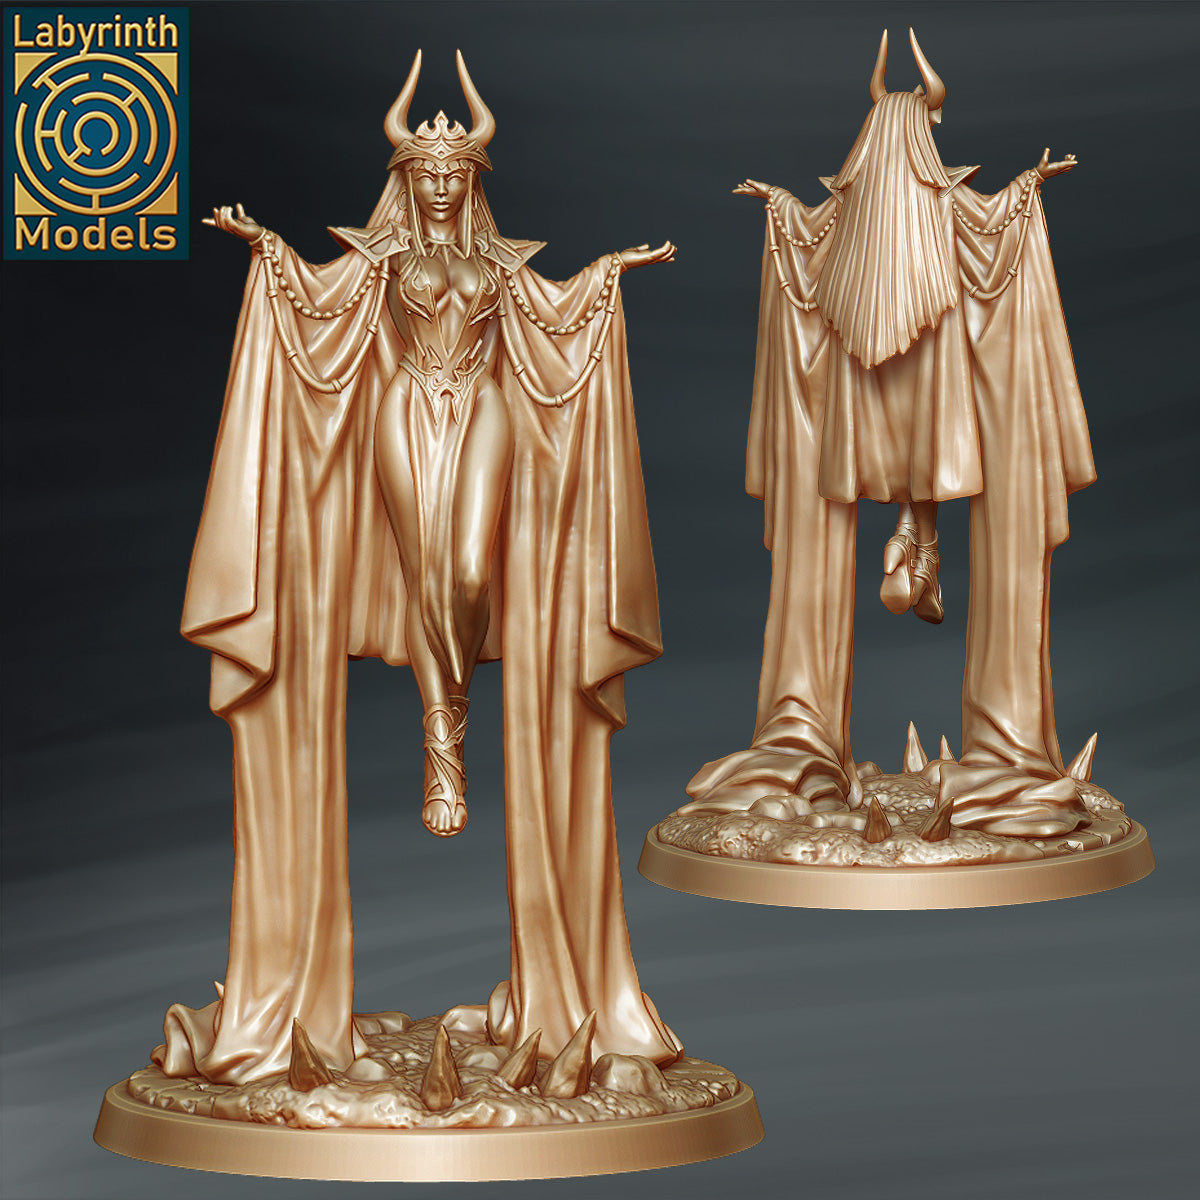 Queen Persephone by Labyrinth Models